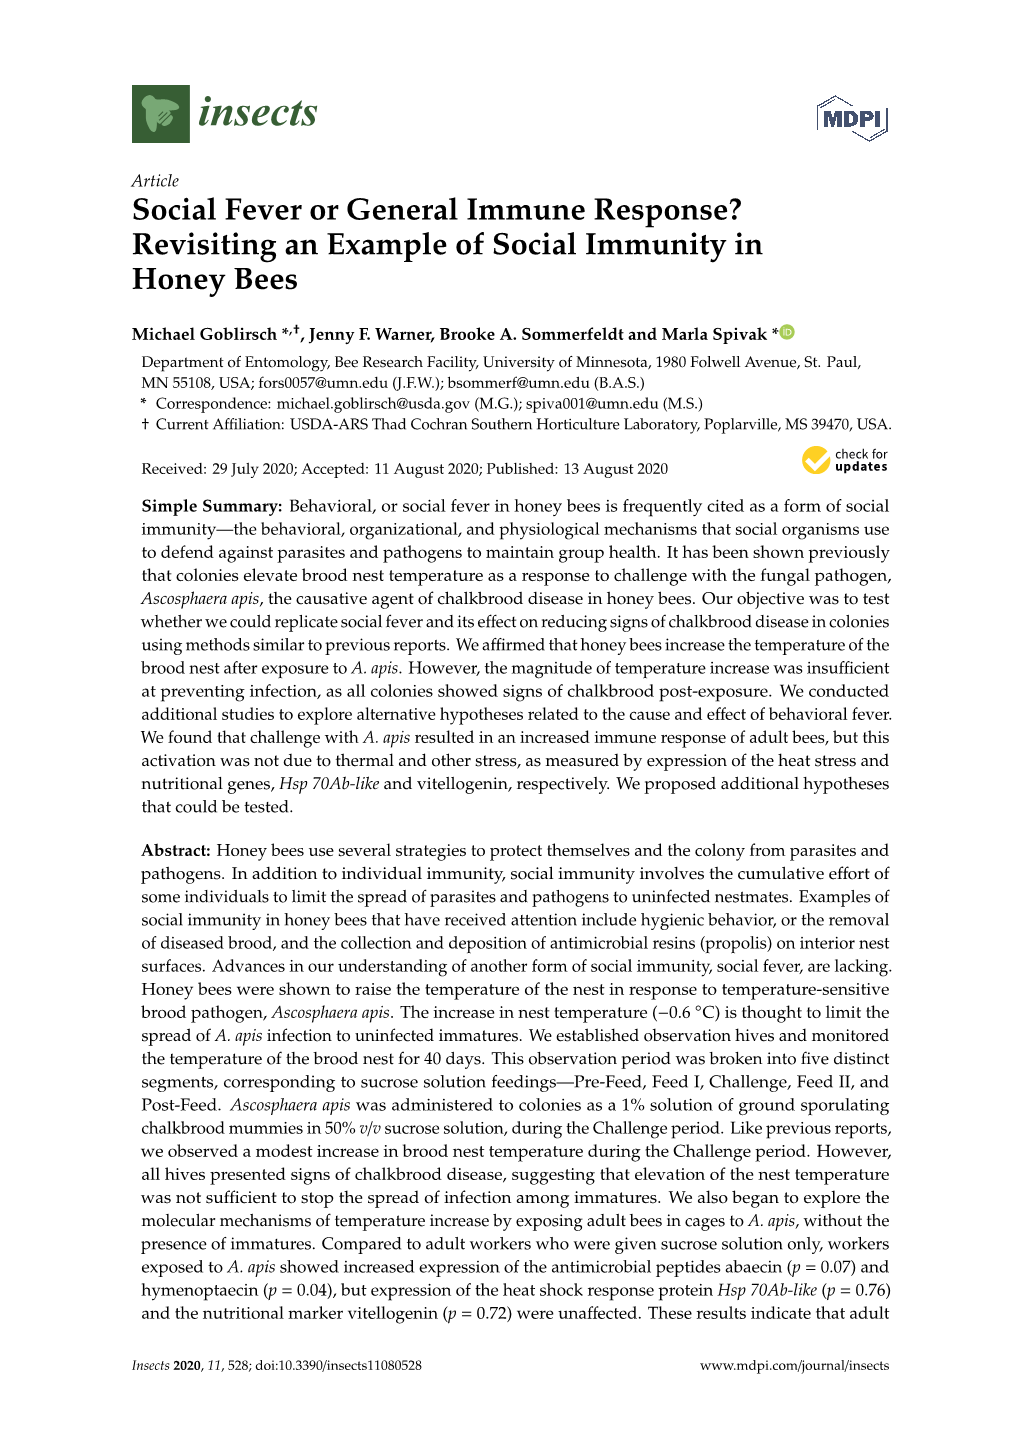 Revisiting an Example of Social Immunity in Honey Bees